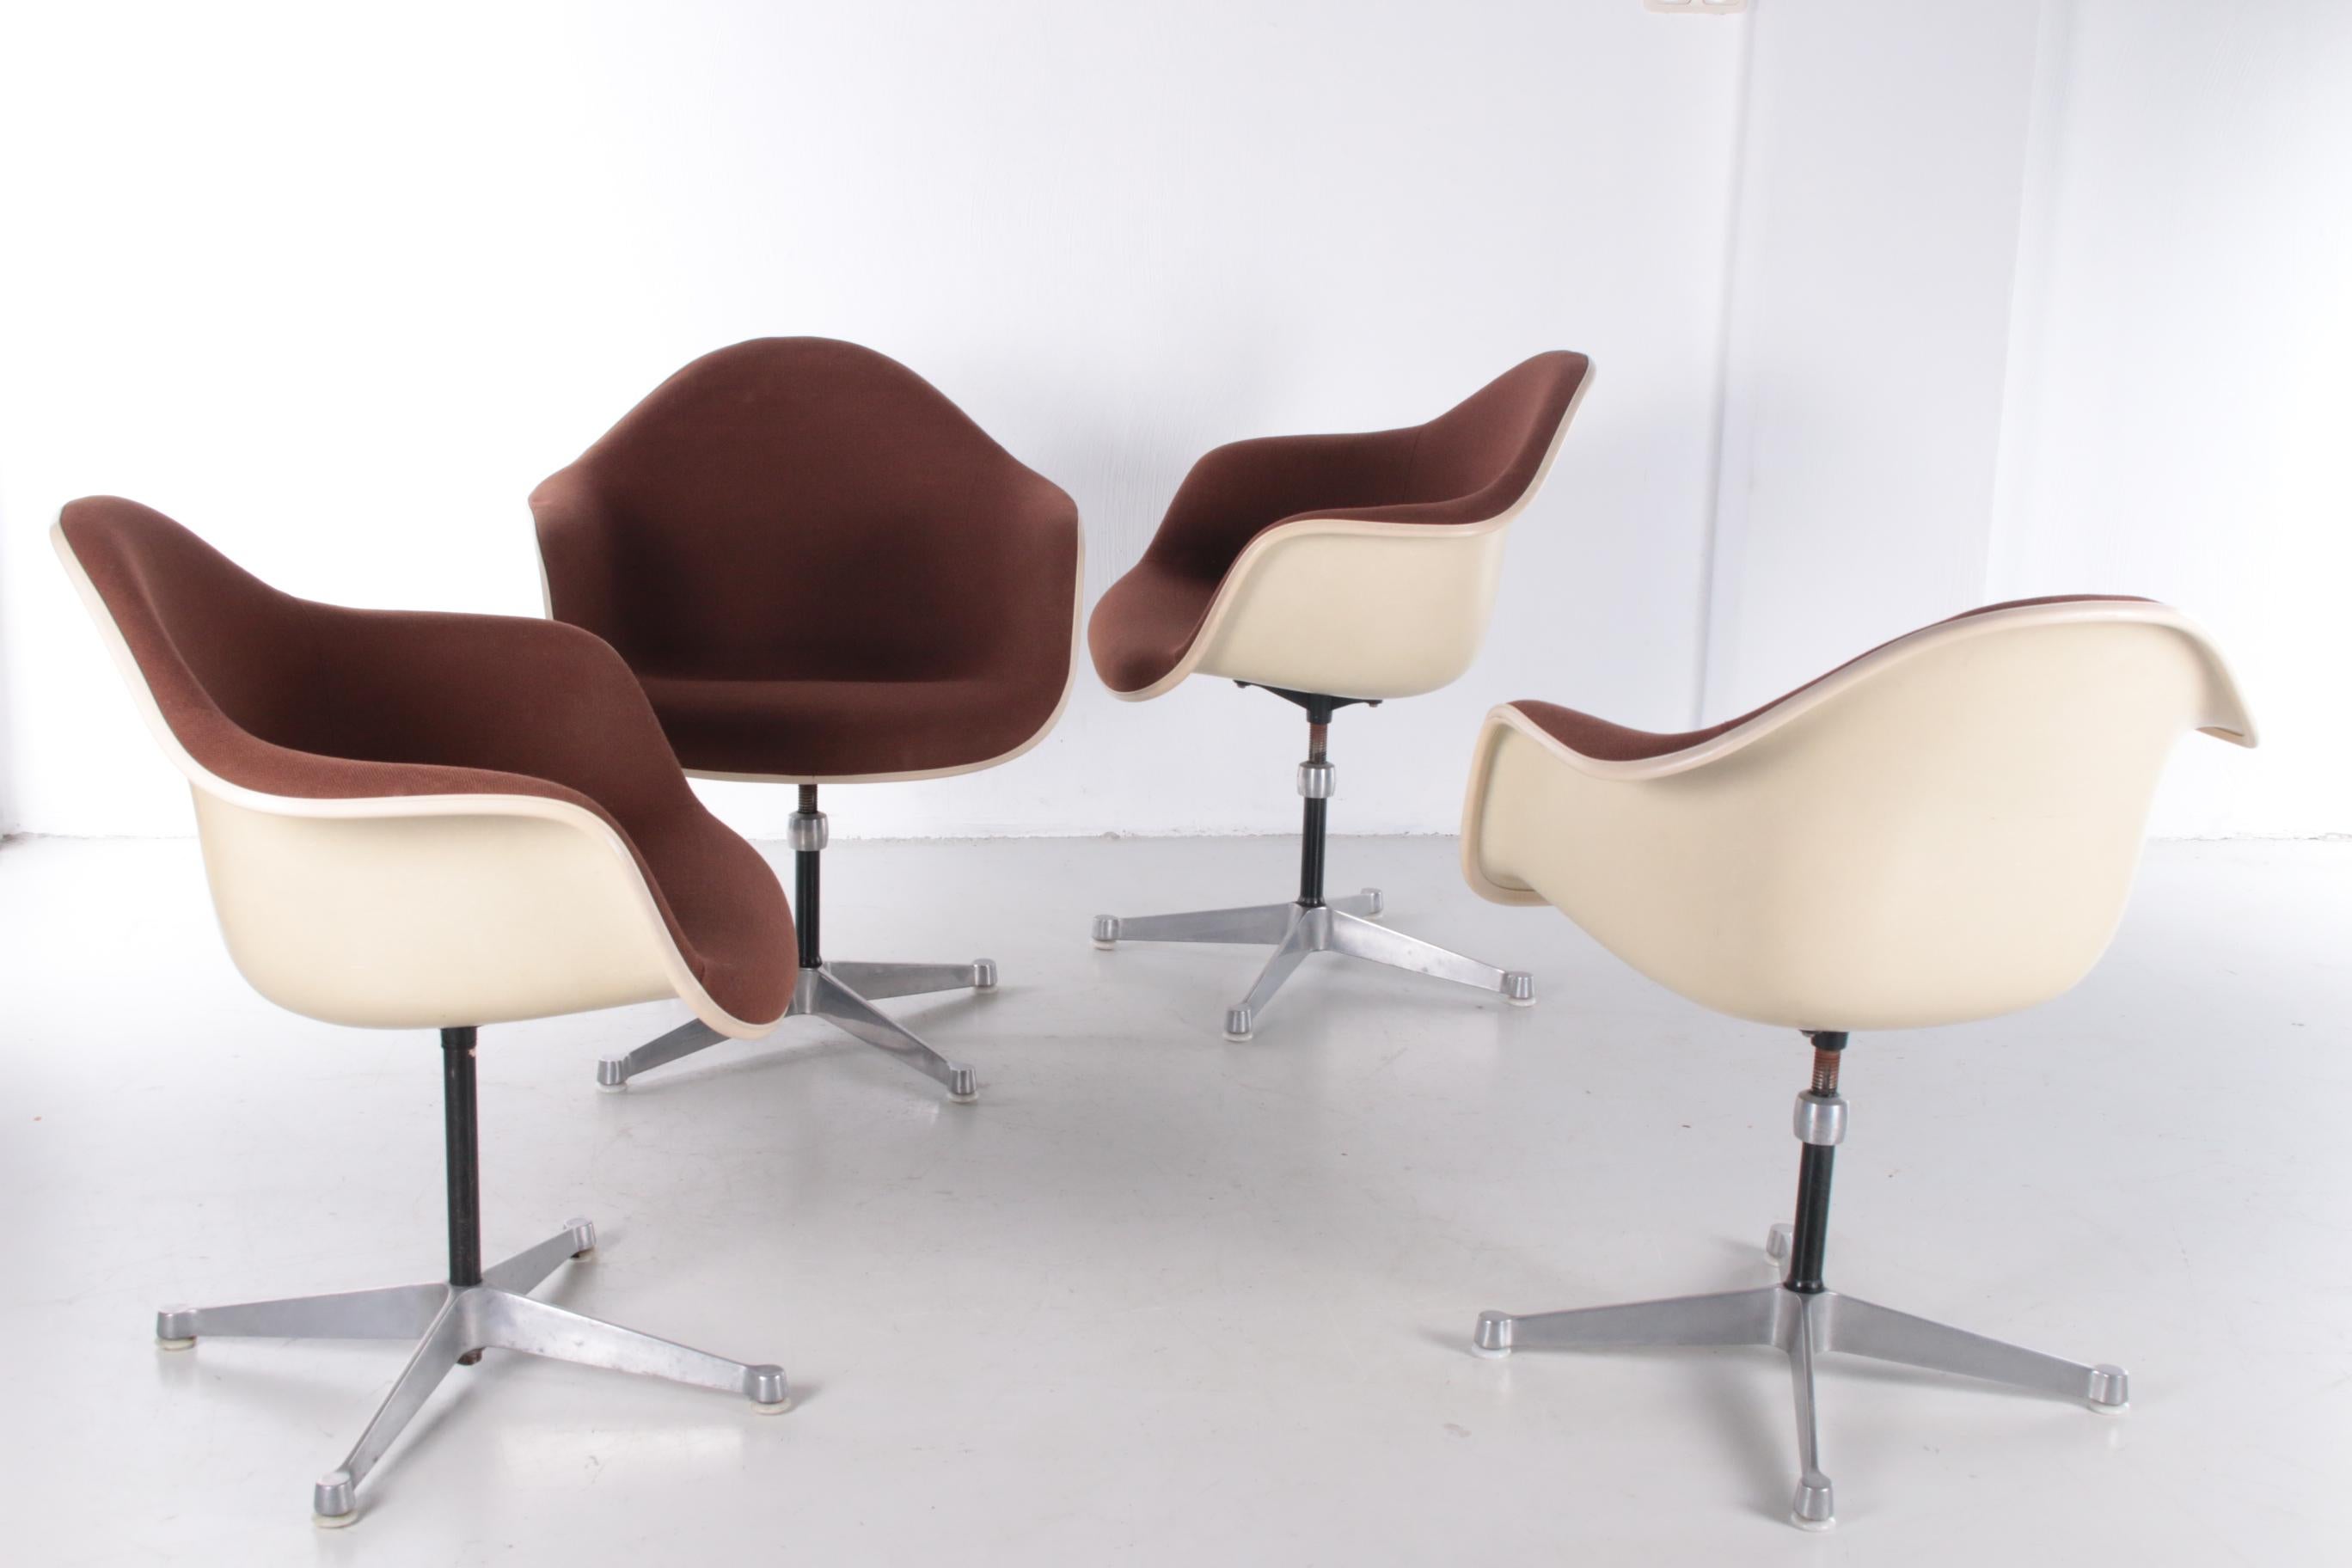 American Set of 4 DAX Chairs by Charles & Ray Eames for Herman Miller